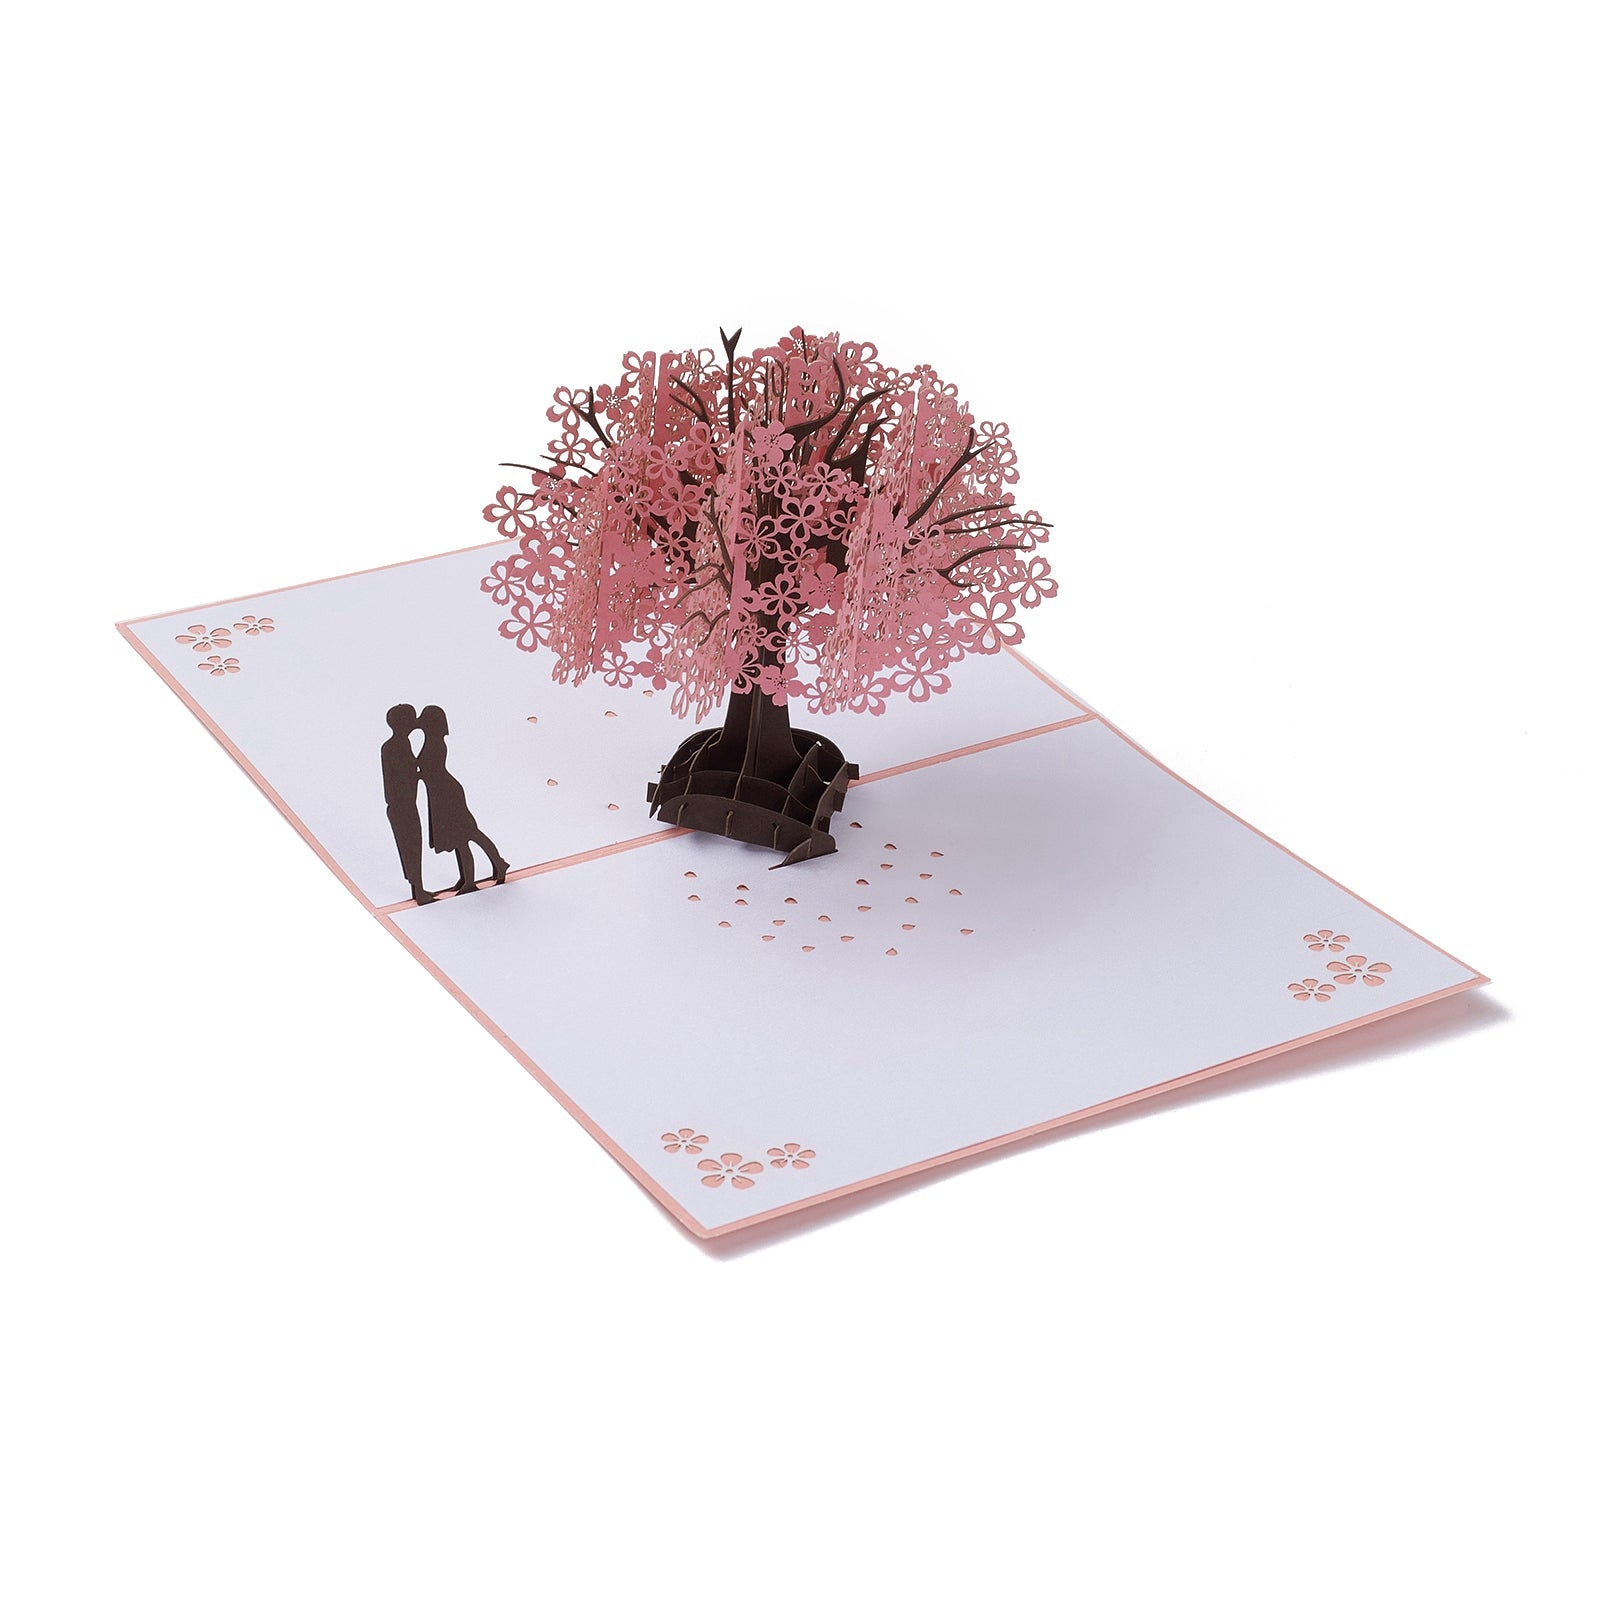 Globleland Rectangle 3D Cherry Tree Pop Up Paper Greeting Card, with Envelope, Valentine's Day Wedding Birthday Invitation Card, Pink, 198x147x6mm